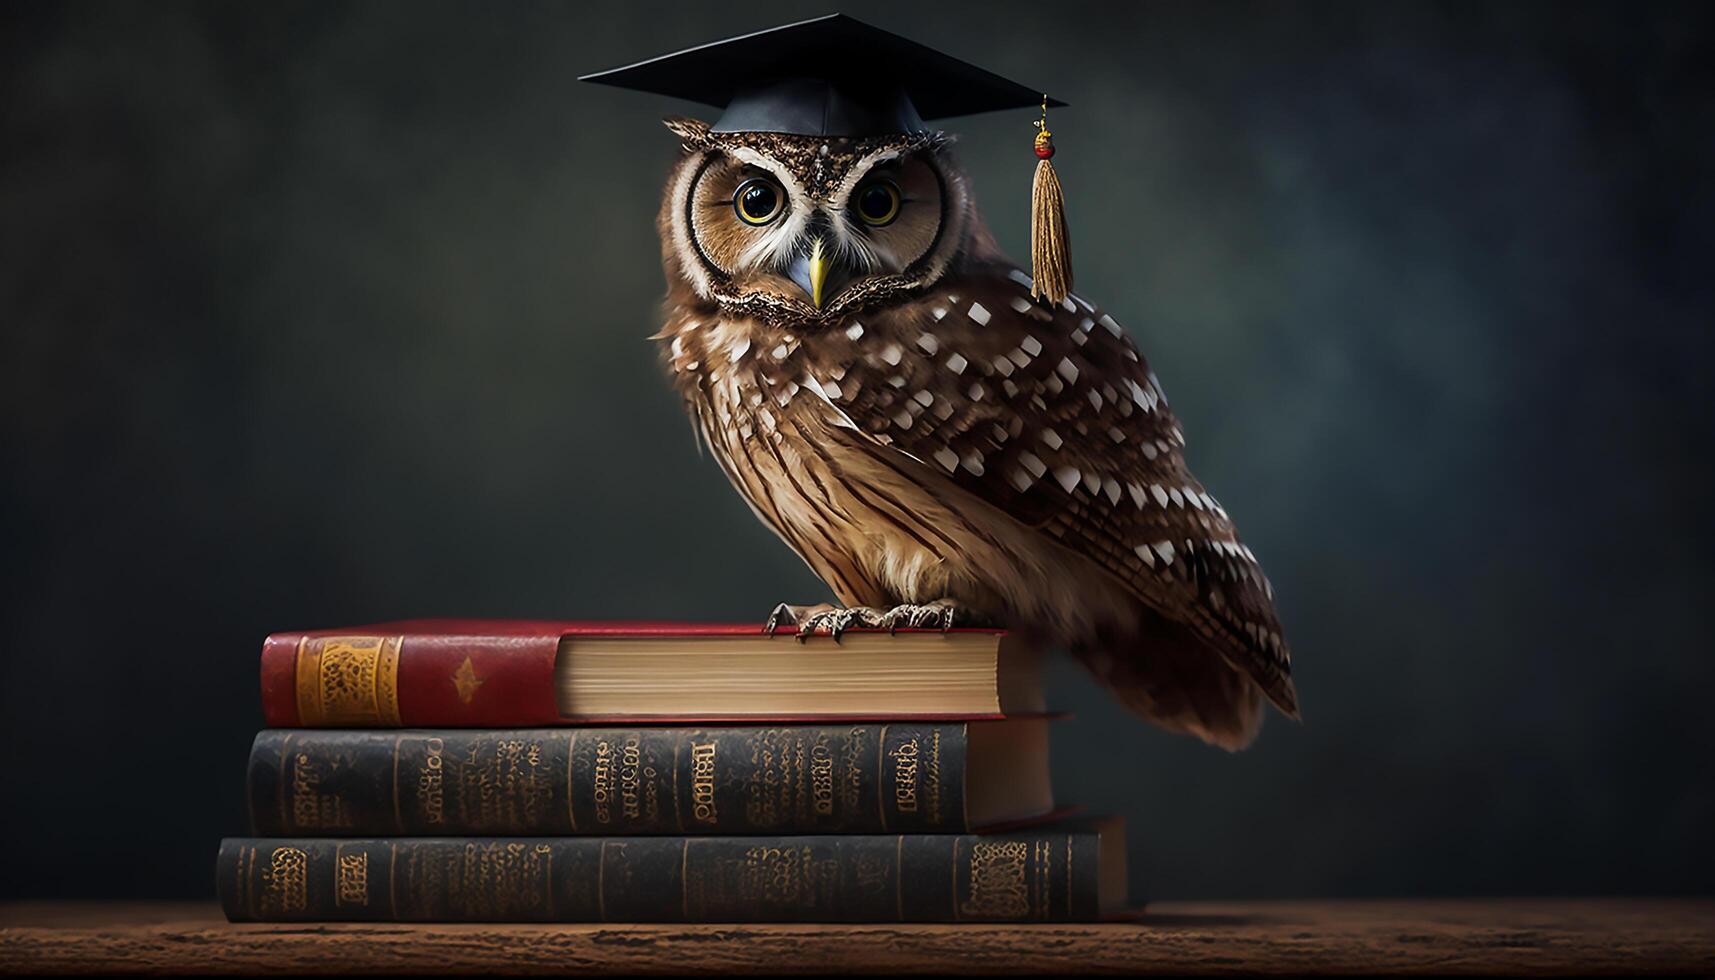 Wise owl wearing graduation cap against a stack of books on a table in a library among the shelves, photo